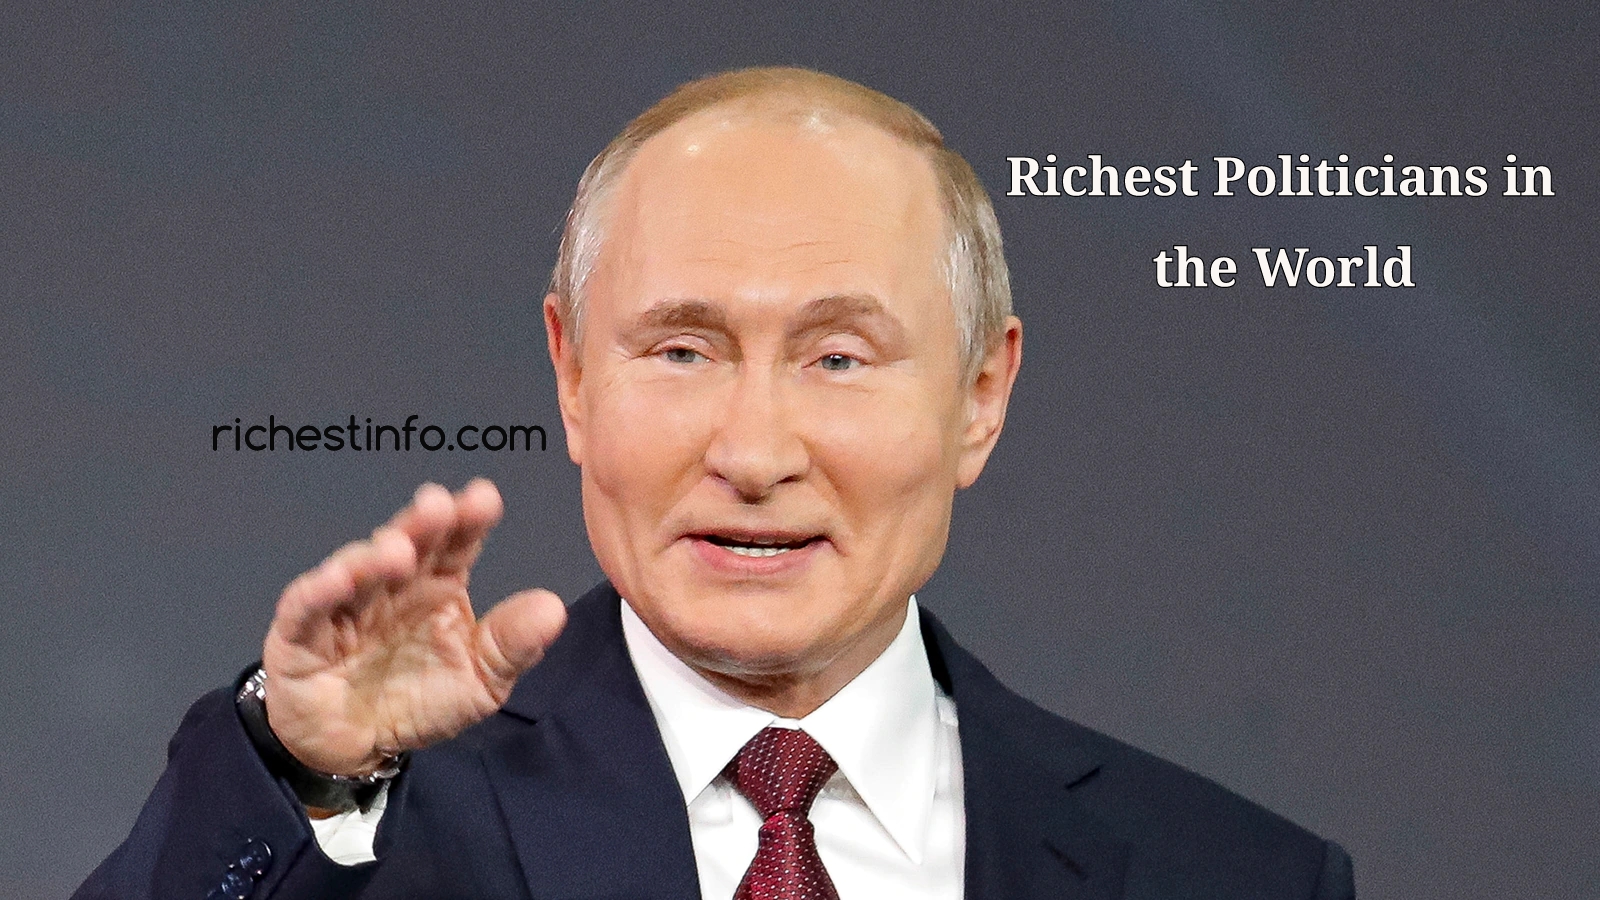 Richest politicians in the world 2022 Forbes list